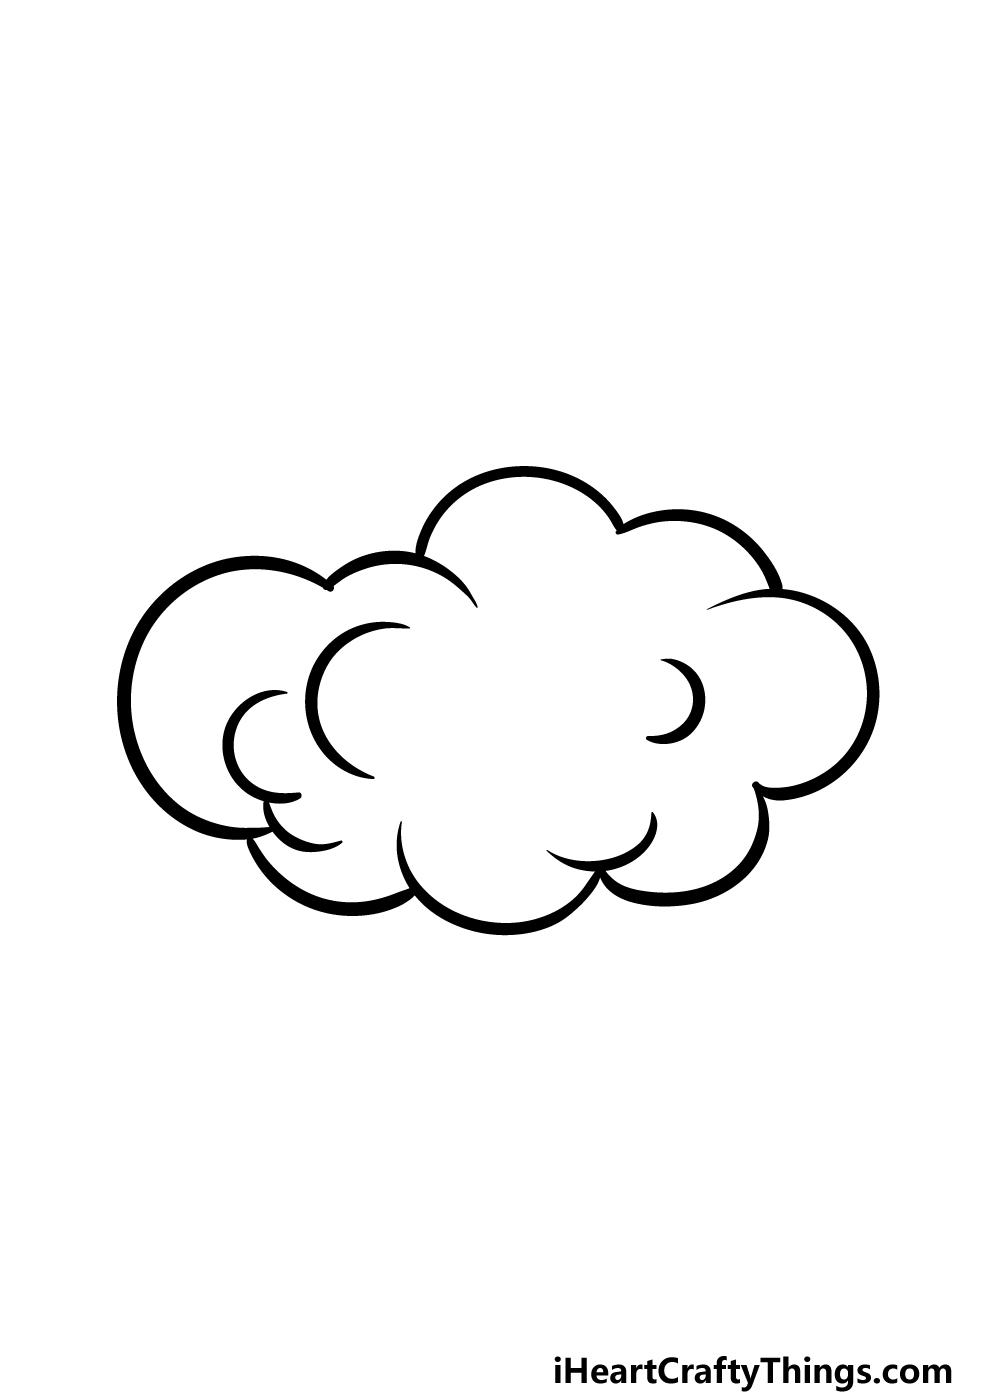 Cartoon Cloud Drawing - How To Draw A Cartoon Cloud Step By Step!